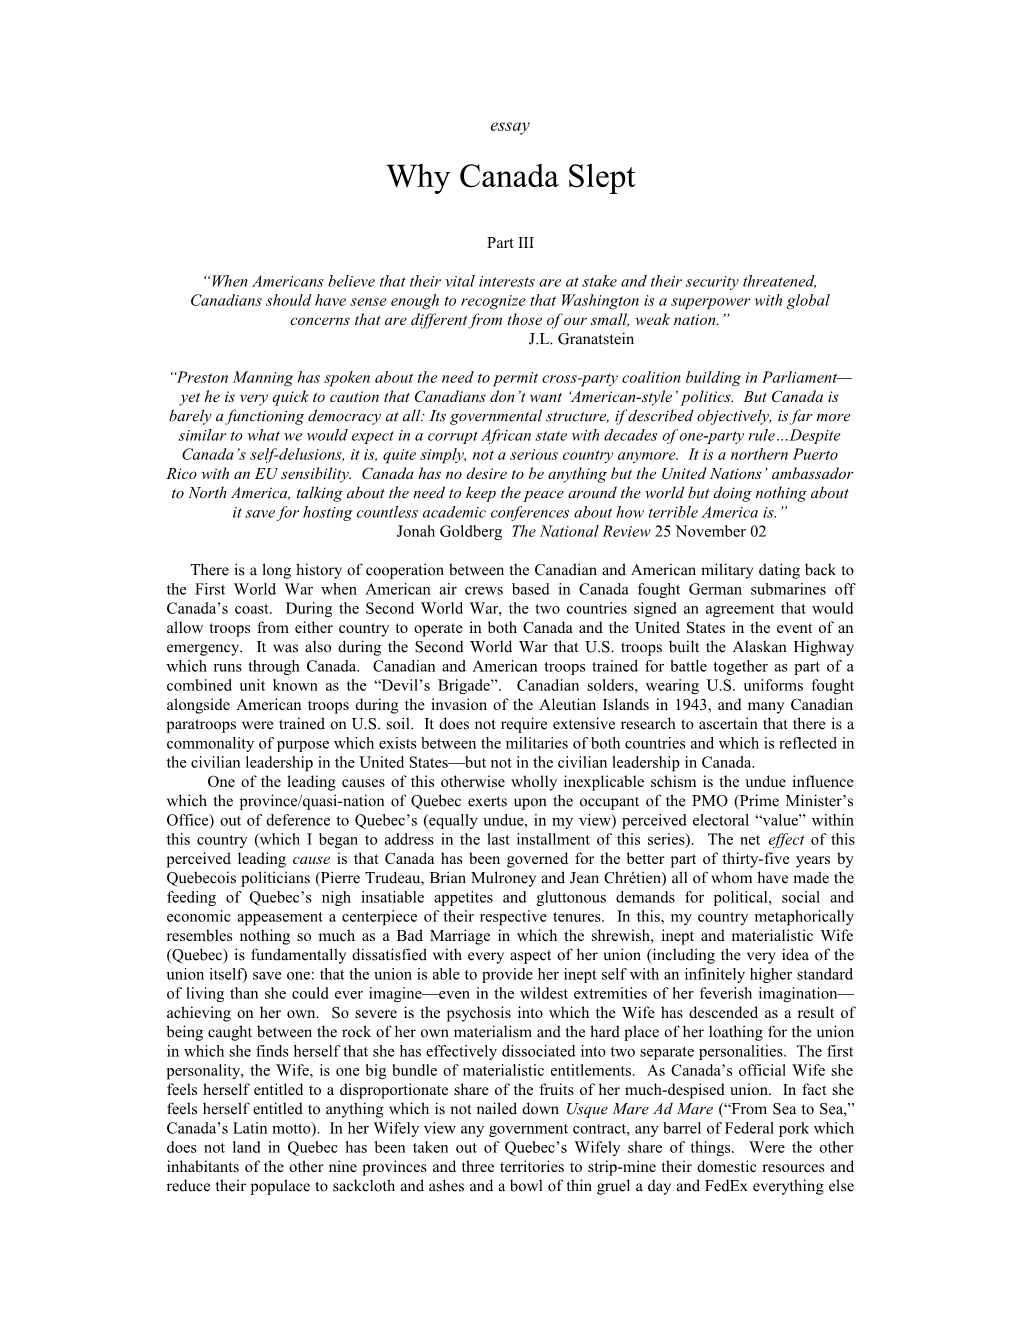 Why Canada Slept